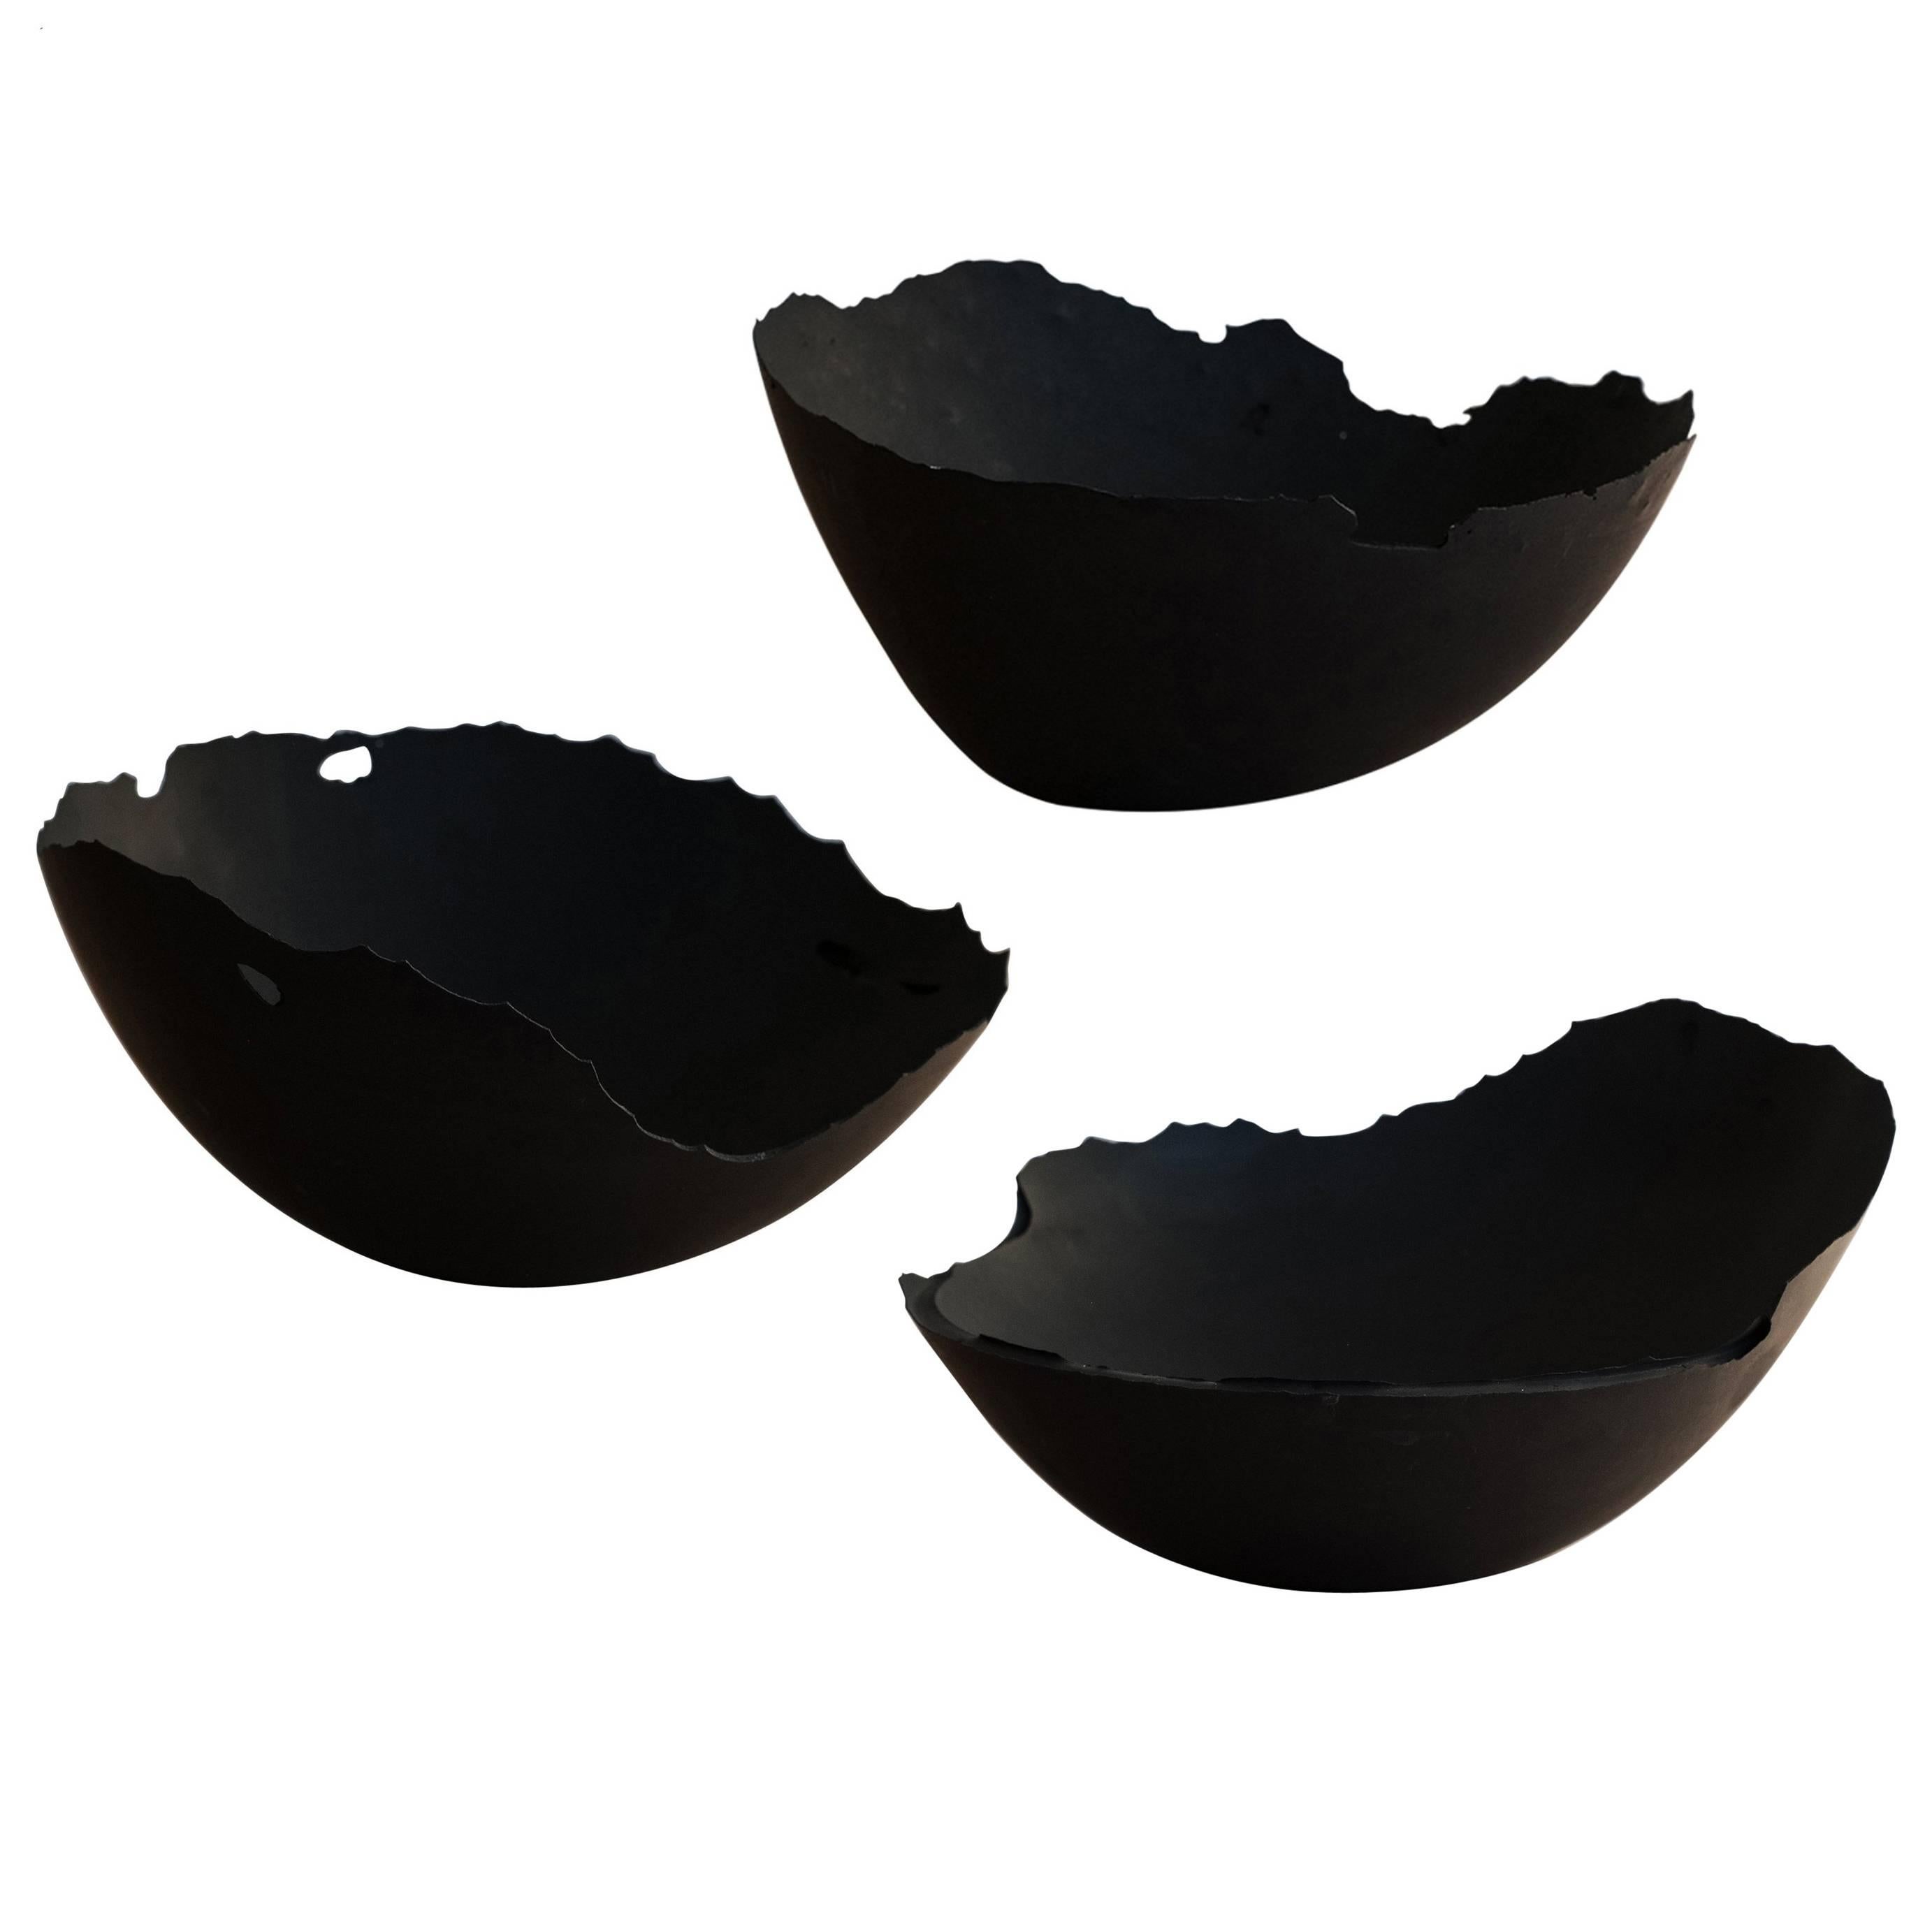 Handmade Cast Concrete Bowl in Black by UMÉ Studio, Set of Three For Sale